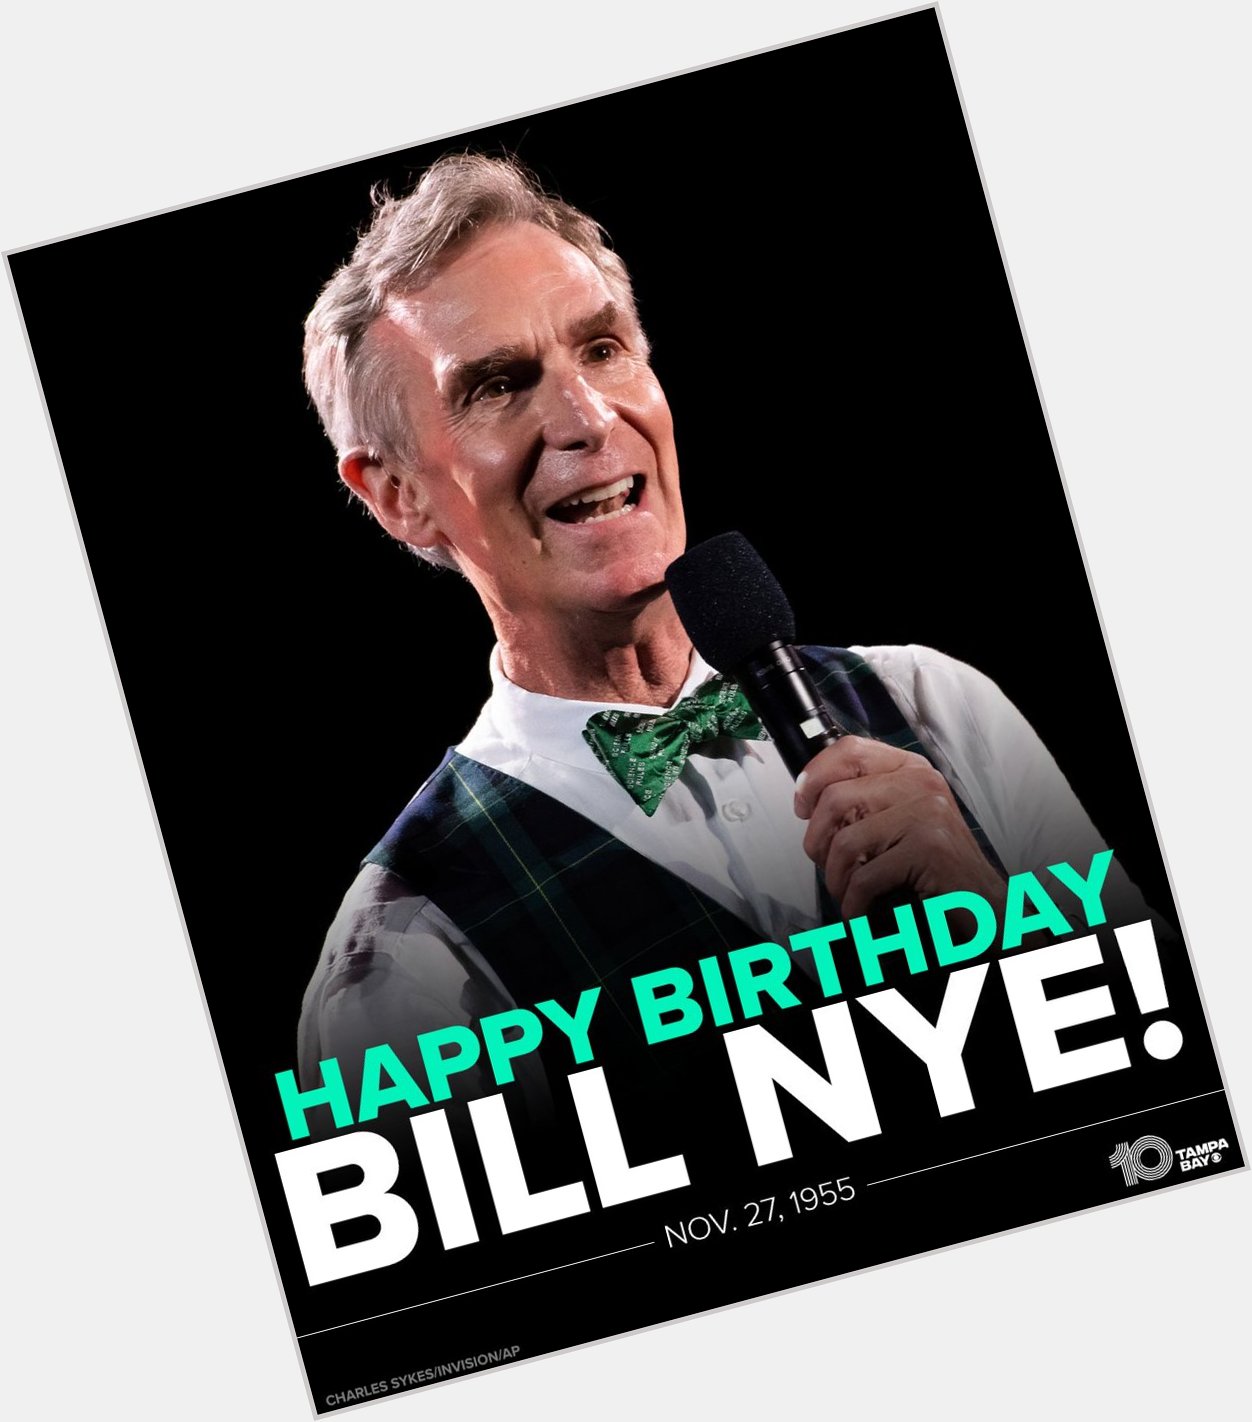 HAPPY BIRTHDAY! Bill Nye \"The Science Guy\" is celebrating his 66th birthday today! 